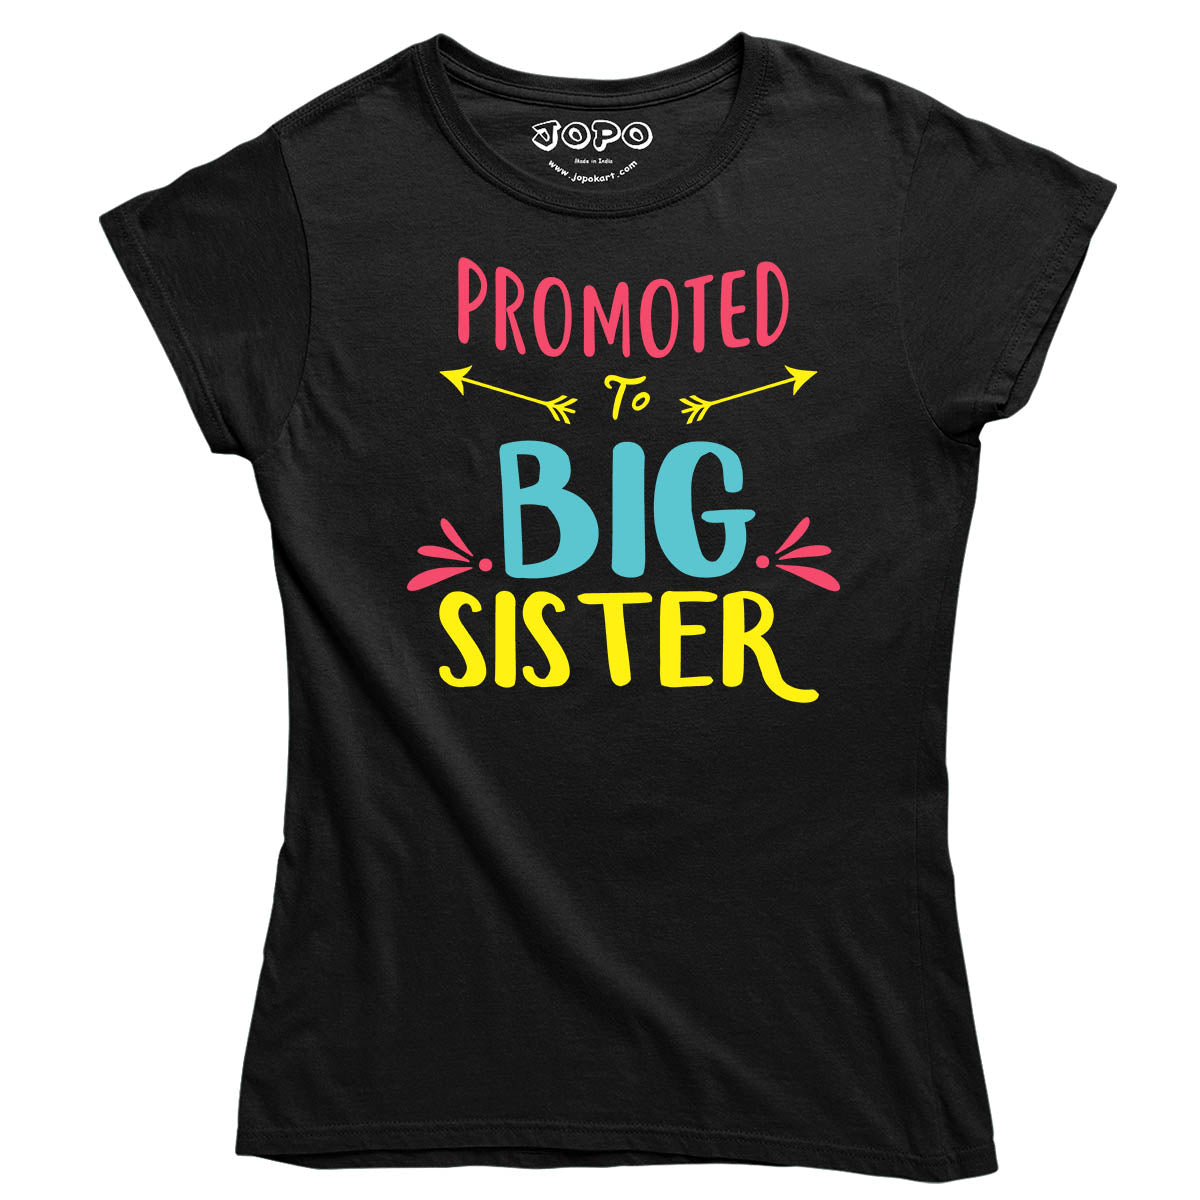 Promoted to big Sister black